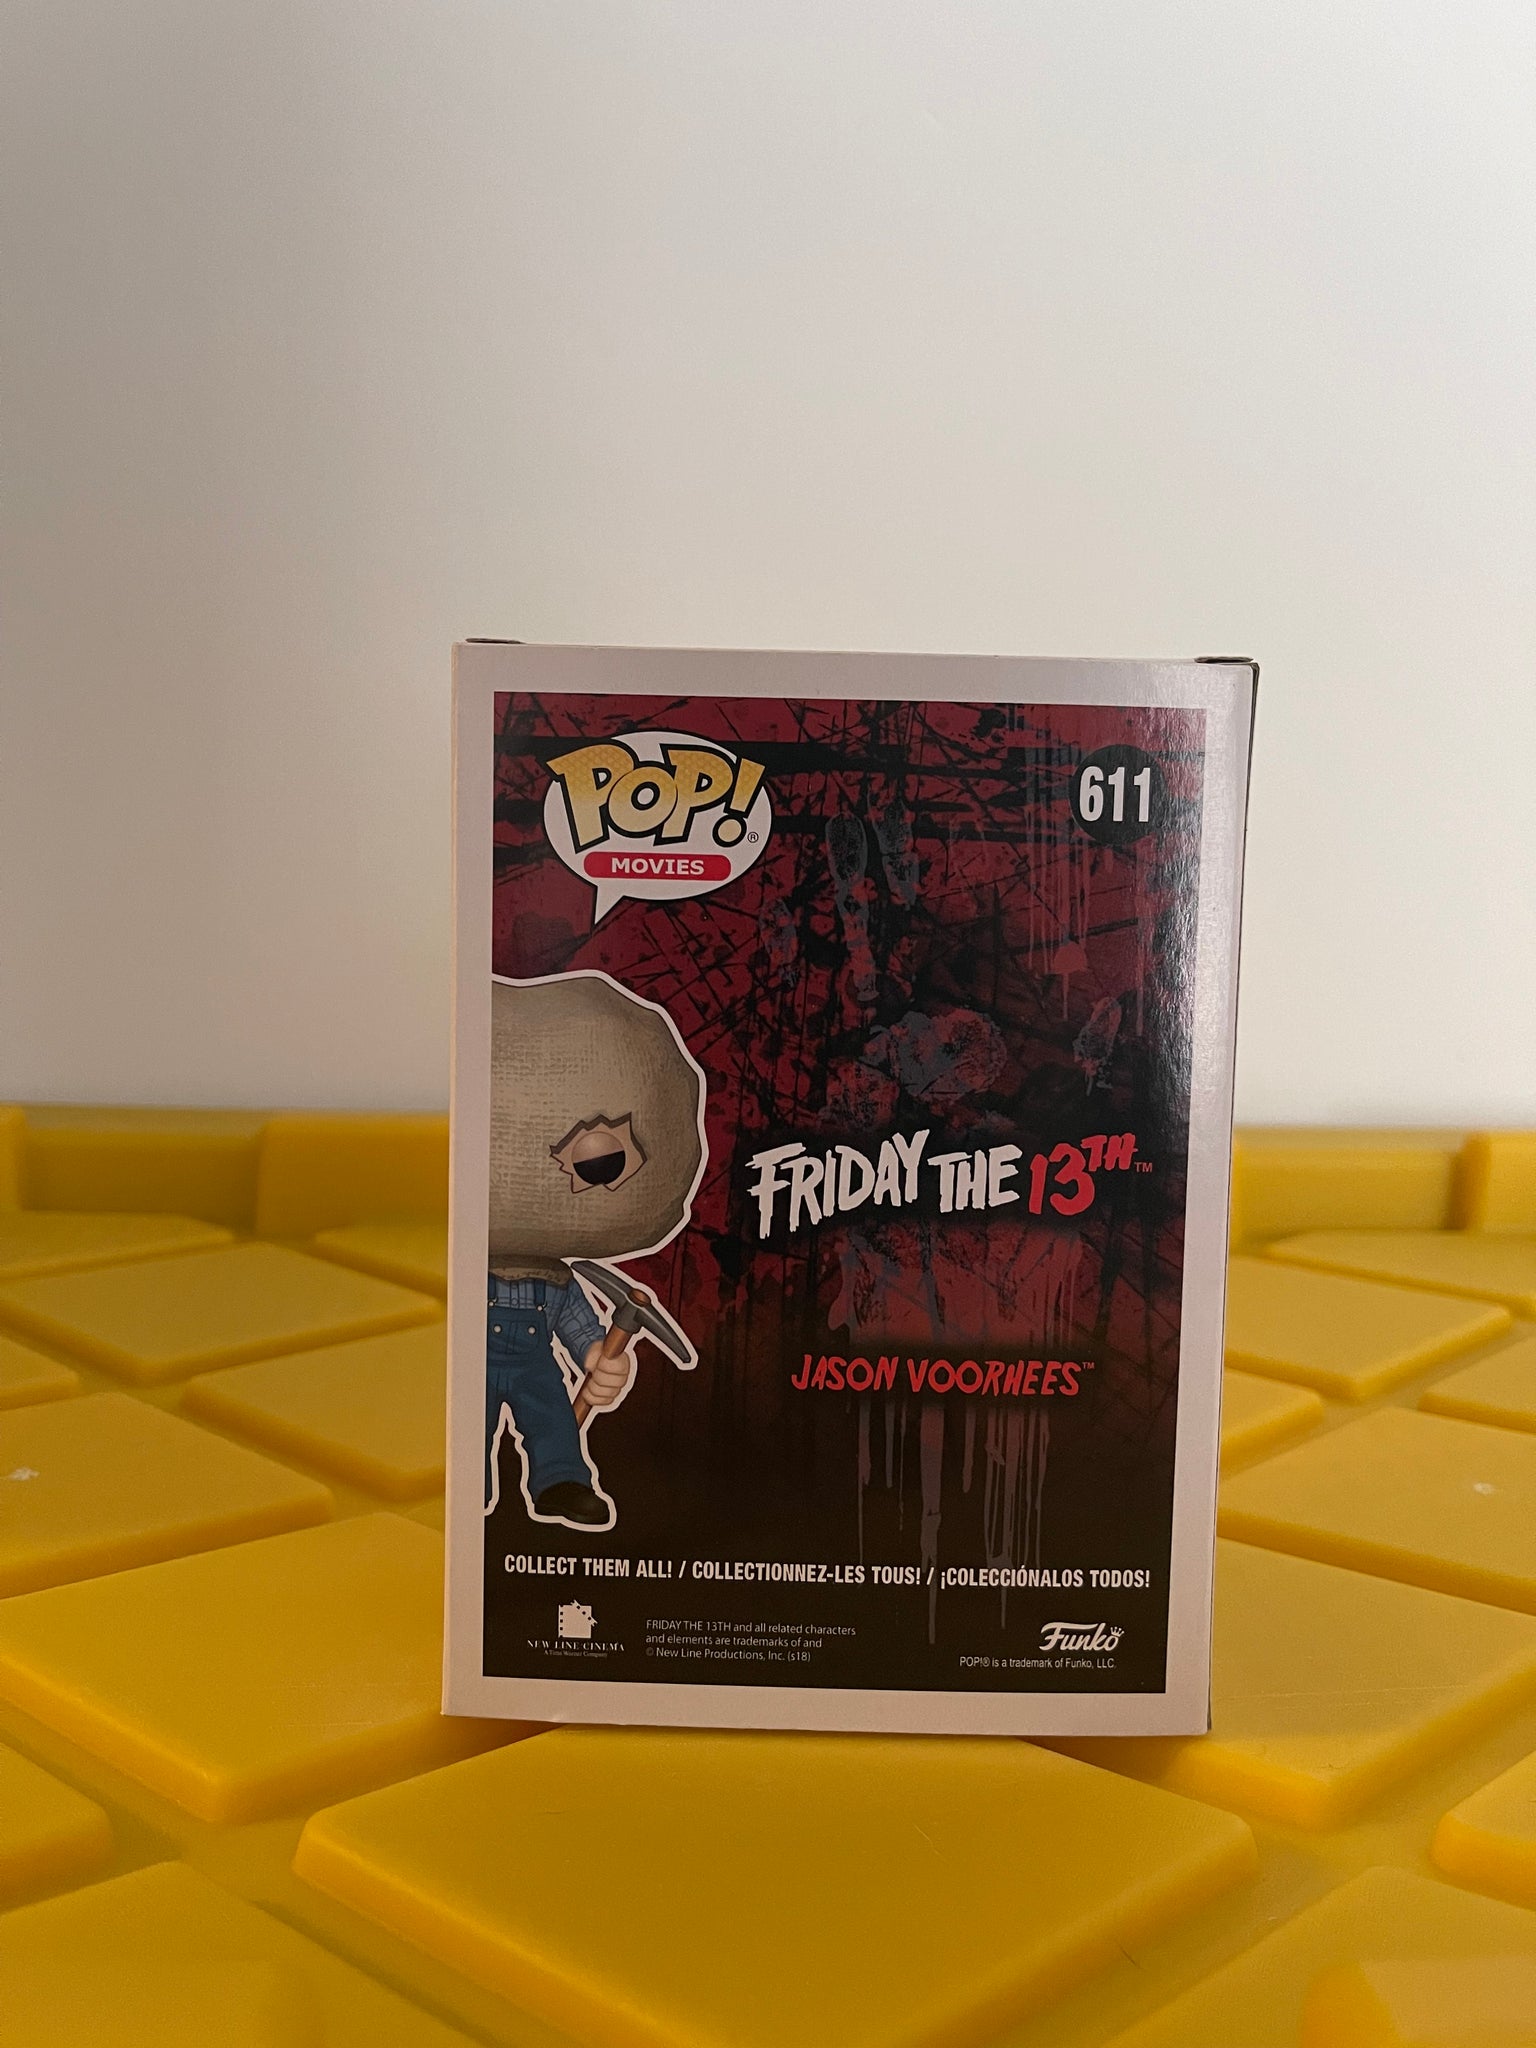 Jason Voorhees - EB Games Limited Edition Exclusive